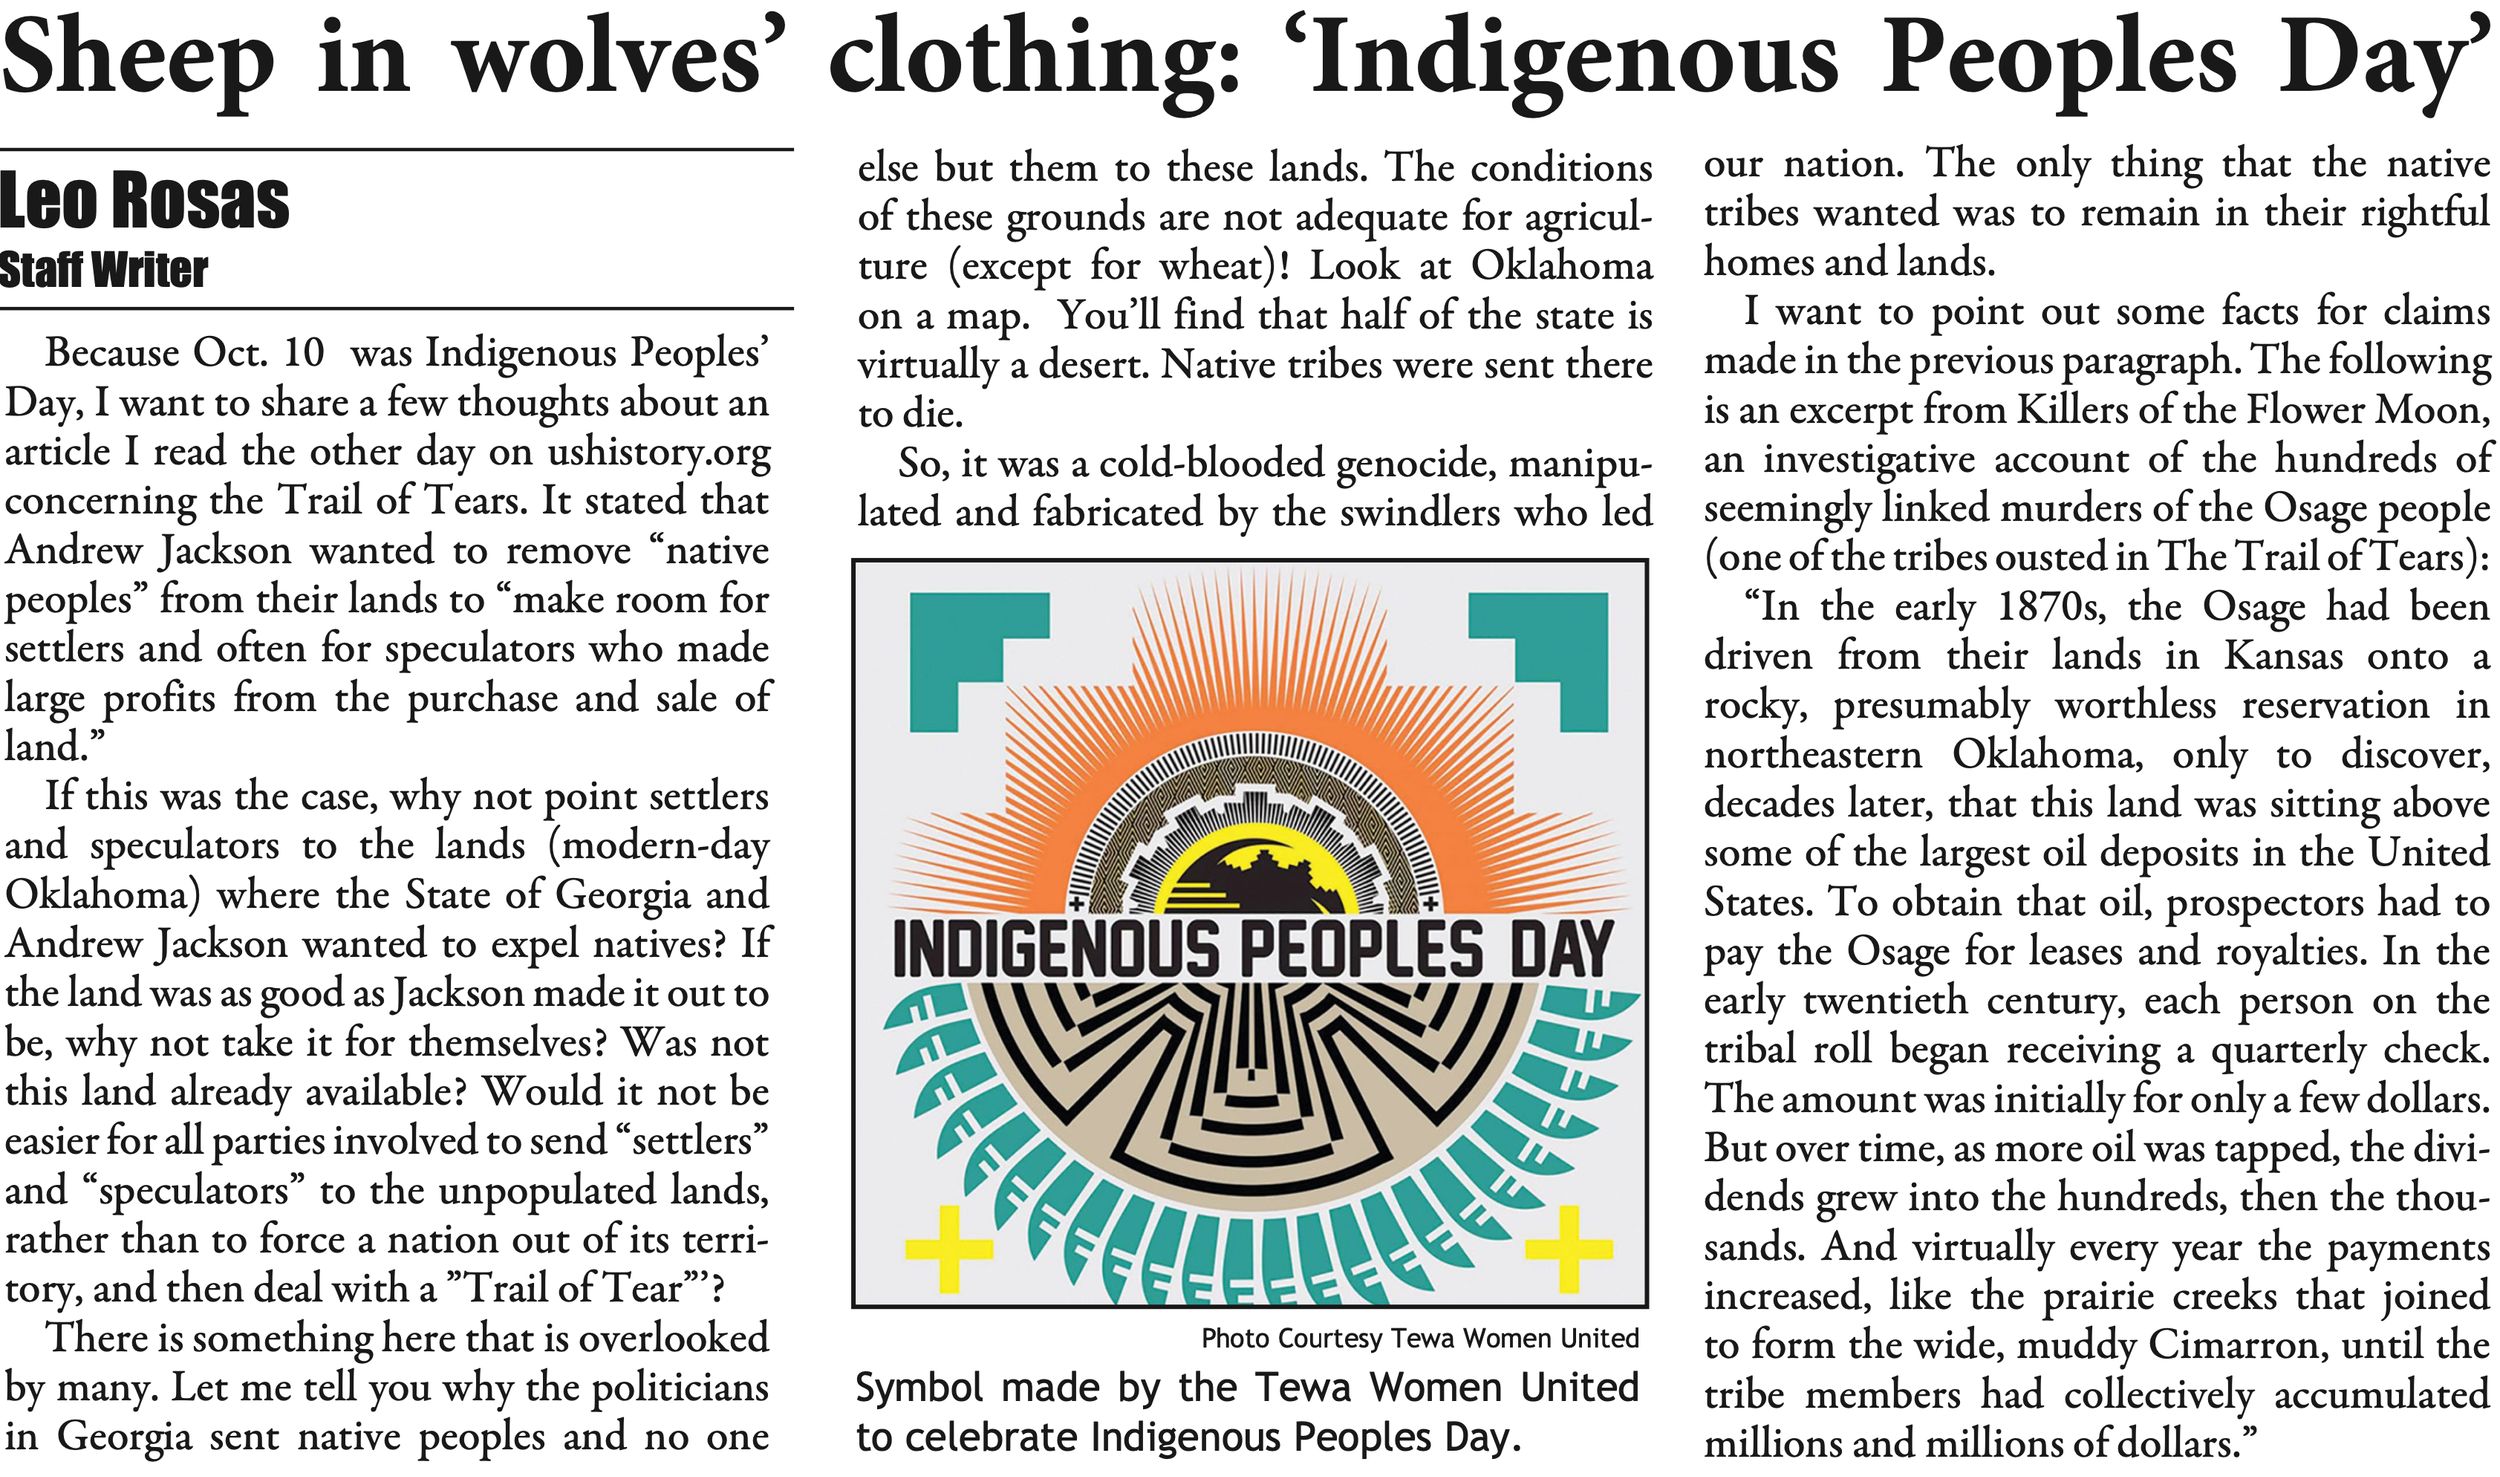 Chronicle digital newspaper clipping of opinion piece on Indigenous Peoples Day.